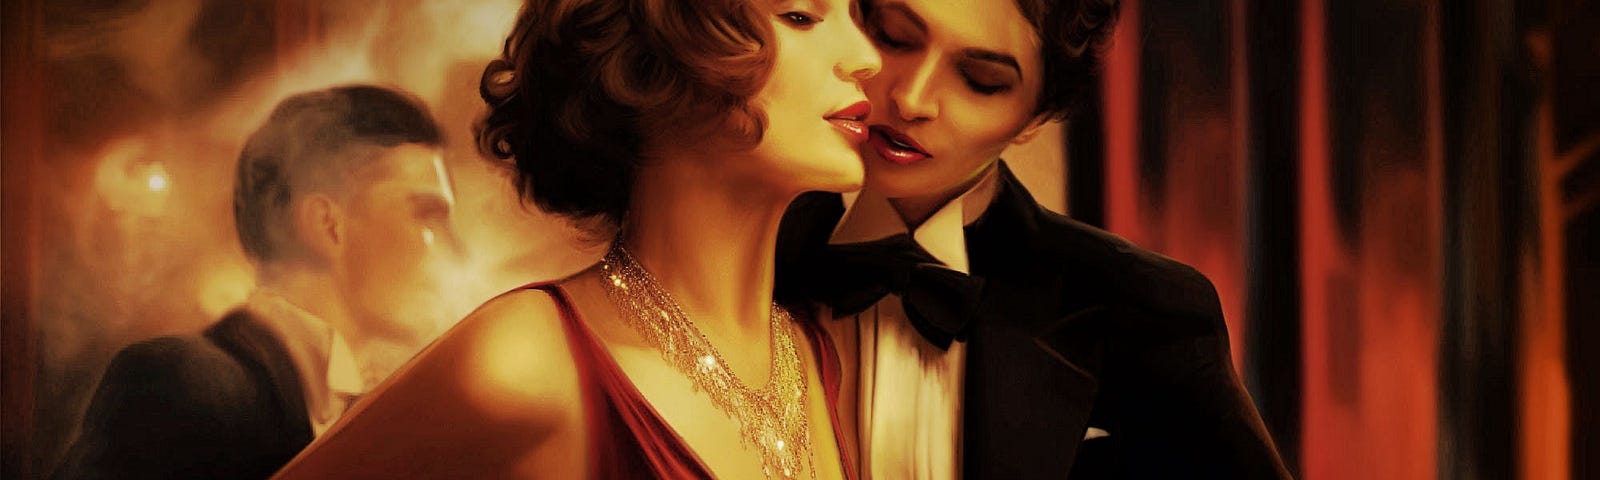 Two women in a dark 1920s speakeasy, one in a tuxedo is admiring another in a long-slung dress, a man and cigarette smoke in the background, warm palette